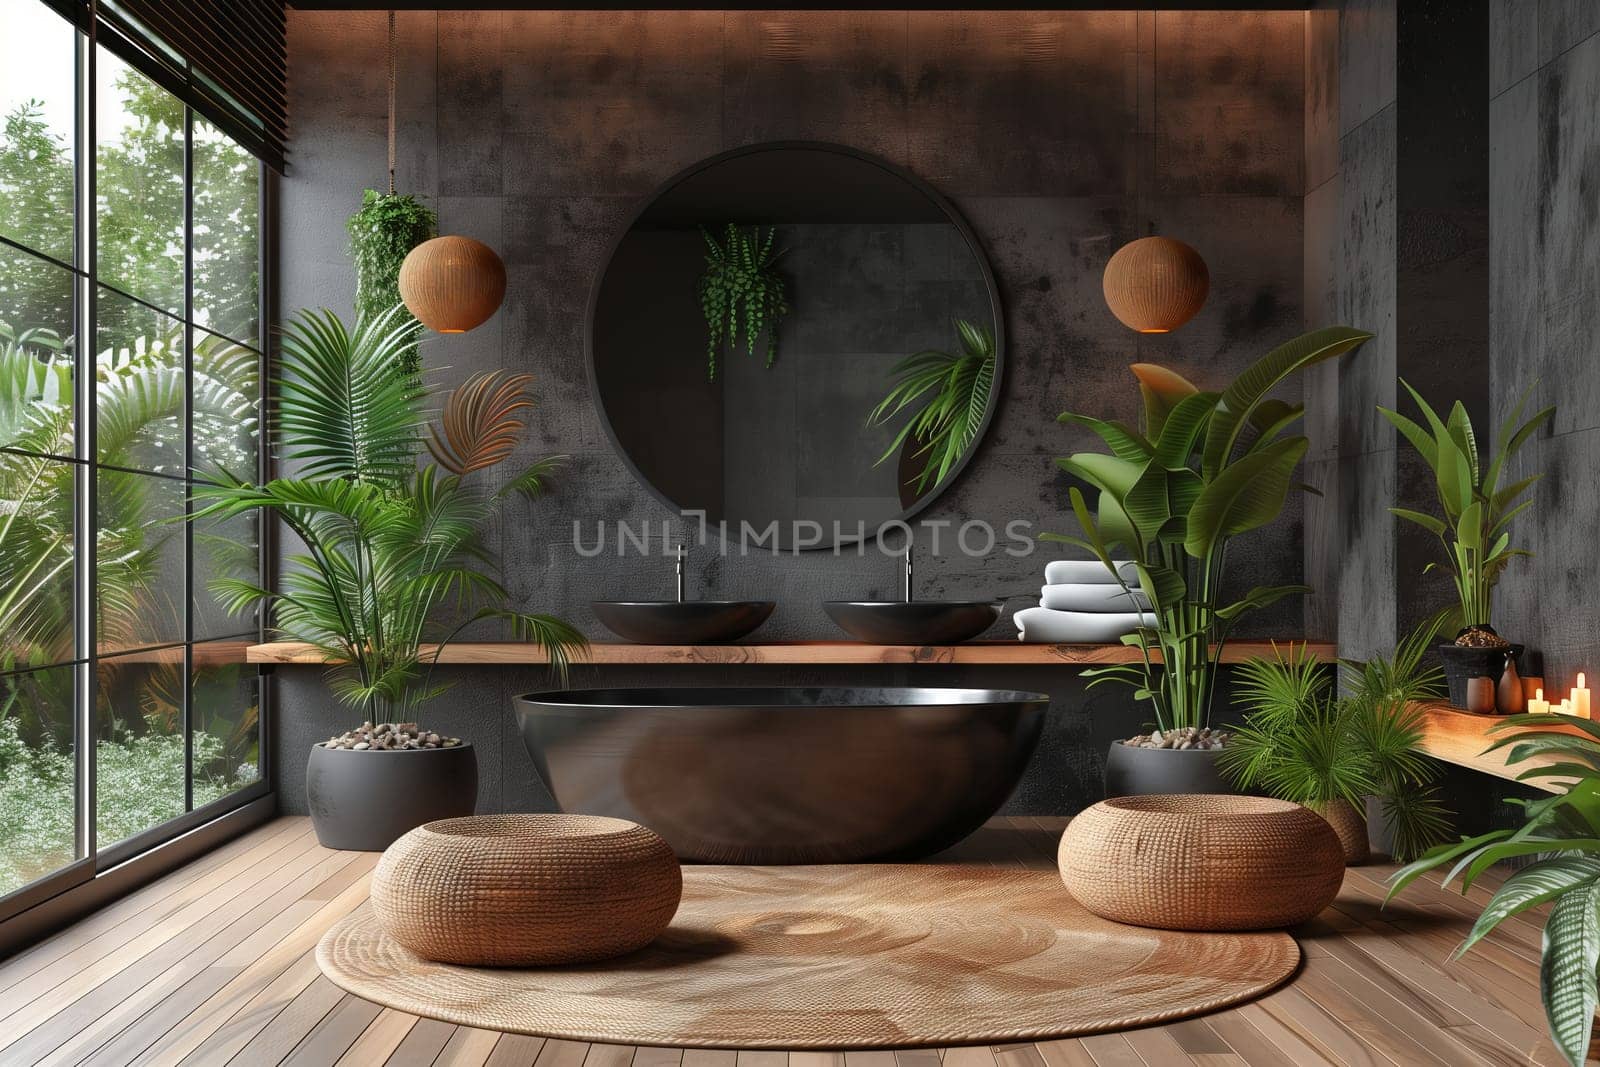 Bathroom with bathtub, sinks, plants, and wood fixtures in an interior design by richwolf